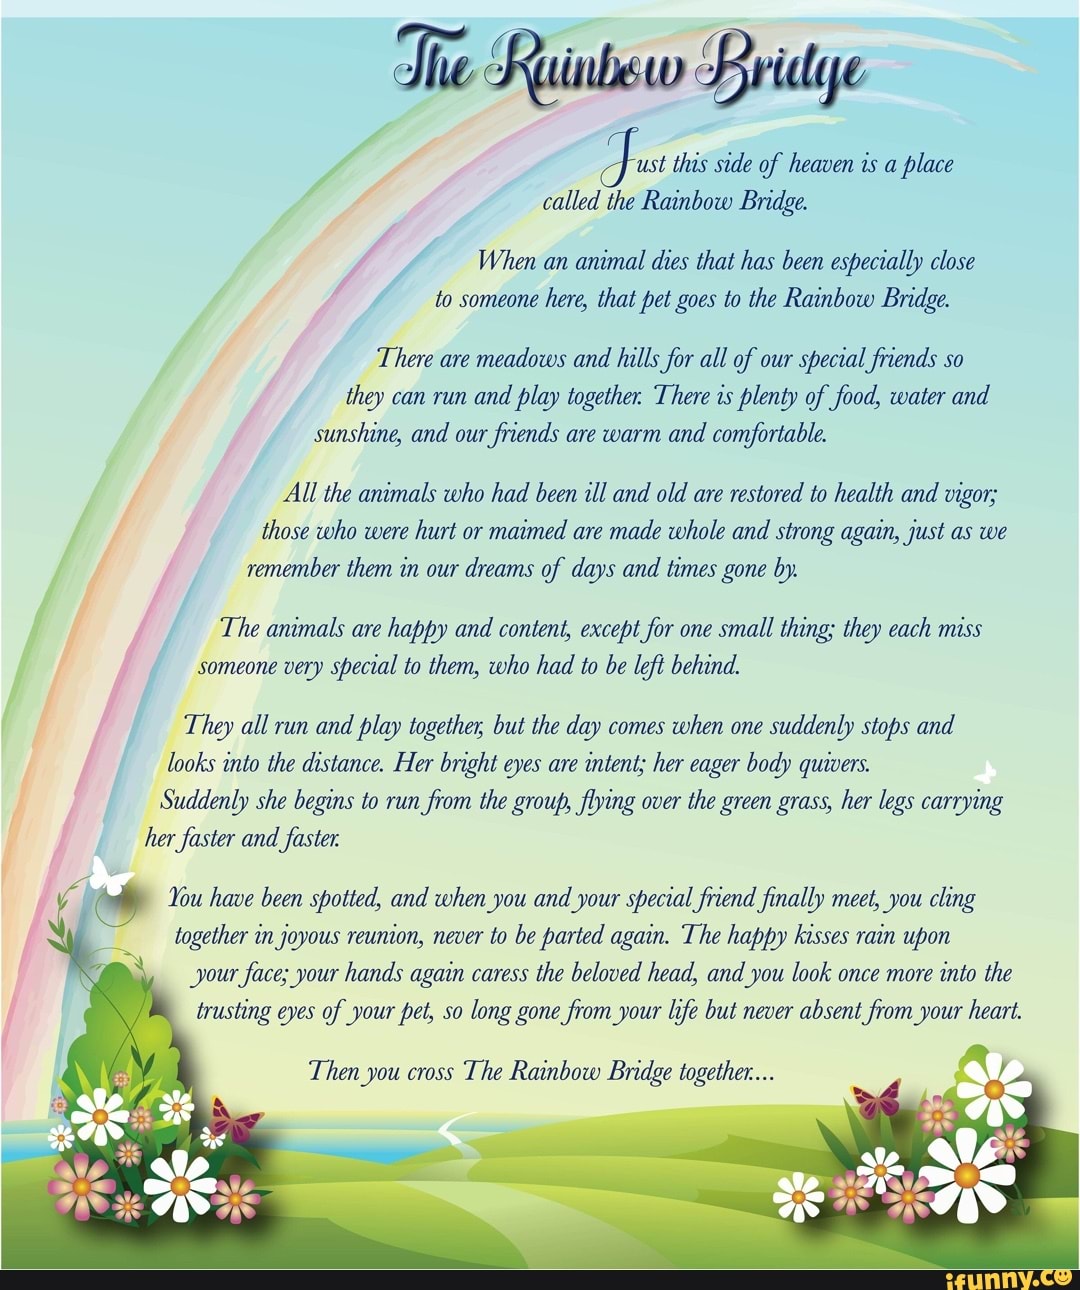 The Runbew Bridye this side of heaven is a place called the Rainbow Bridge.  When an